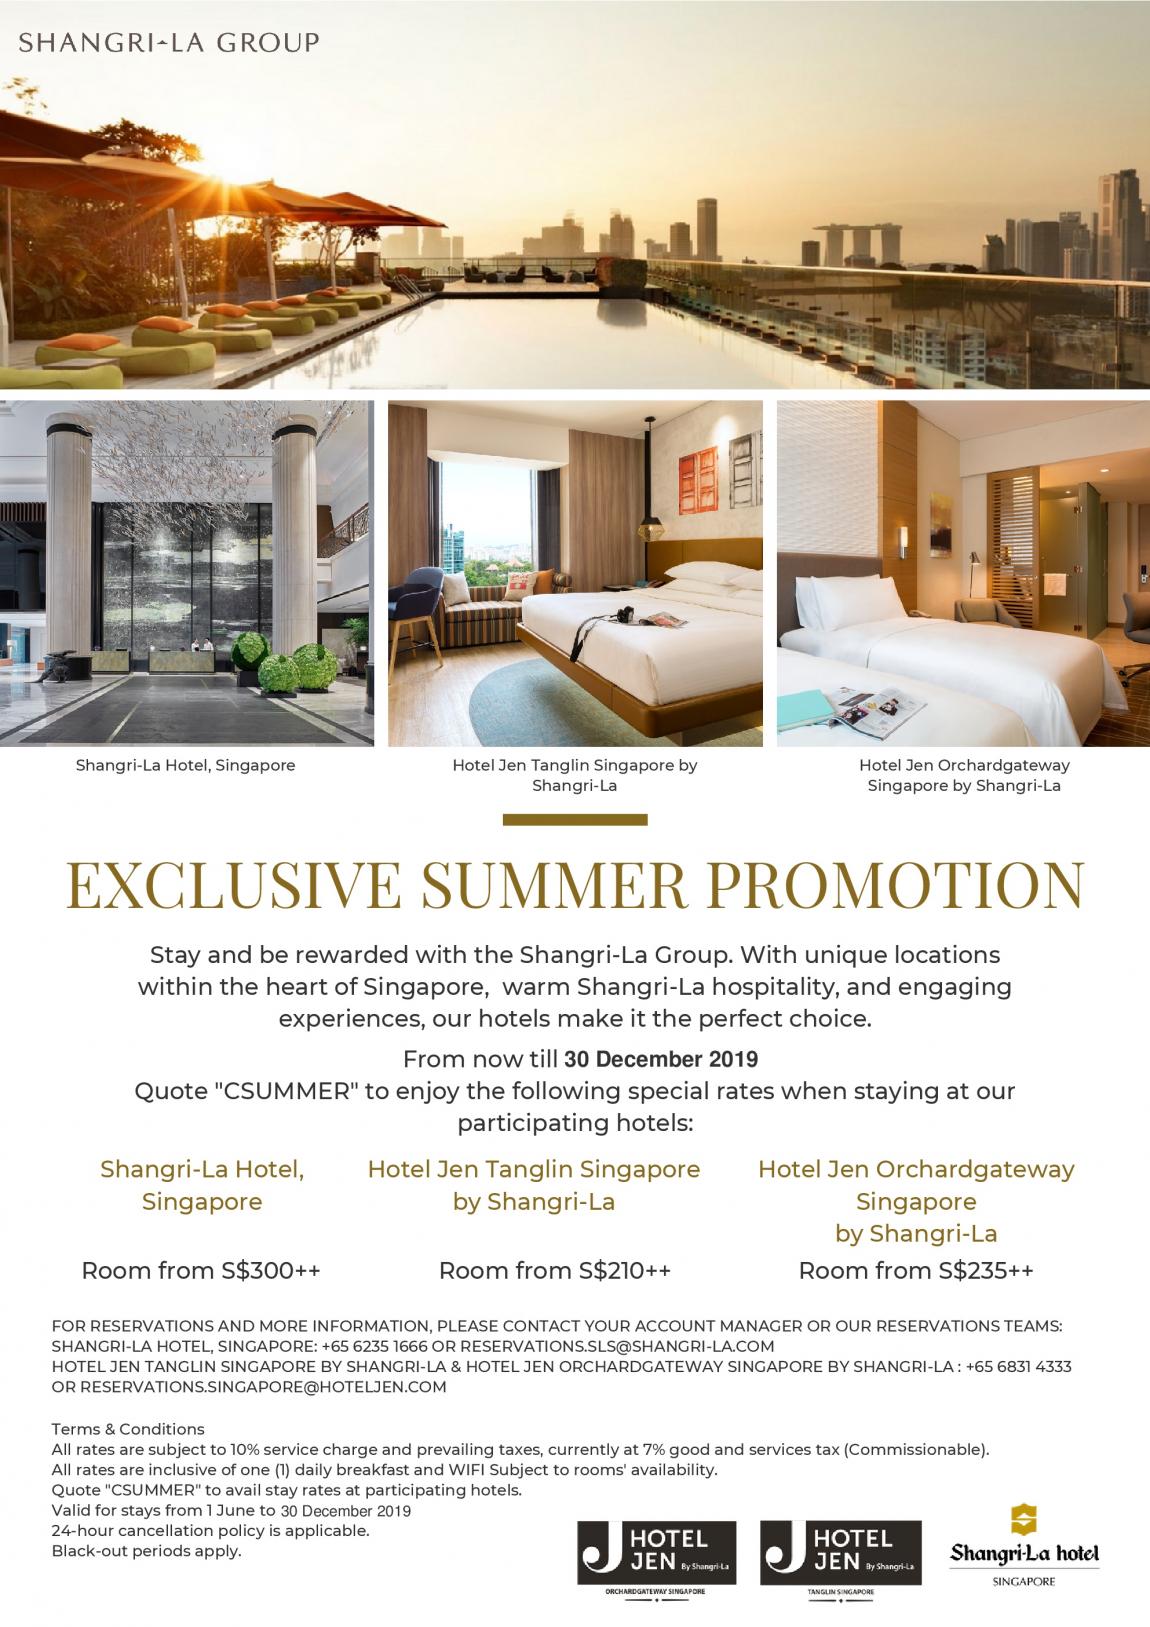 Shangrila Group Hotels Singapore Exclusive Summer Promotion valid